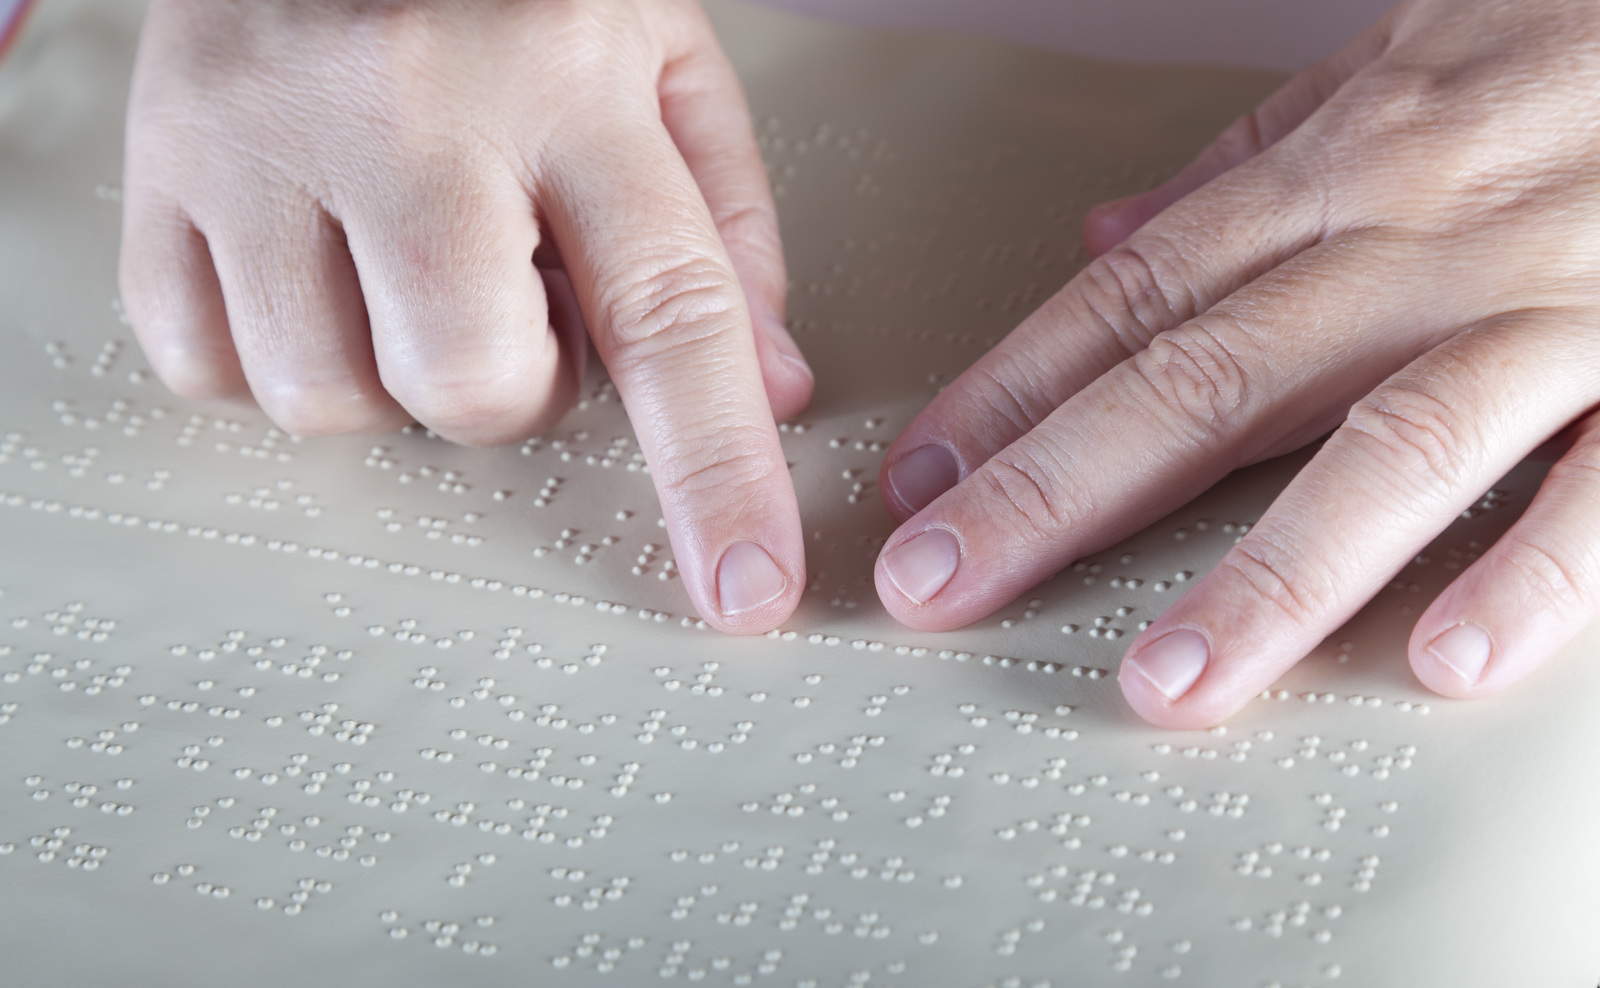 Hands reading a sheet of paper, with braille embossed on it.